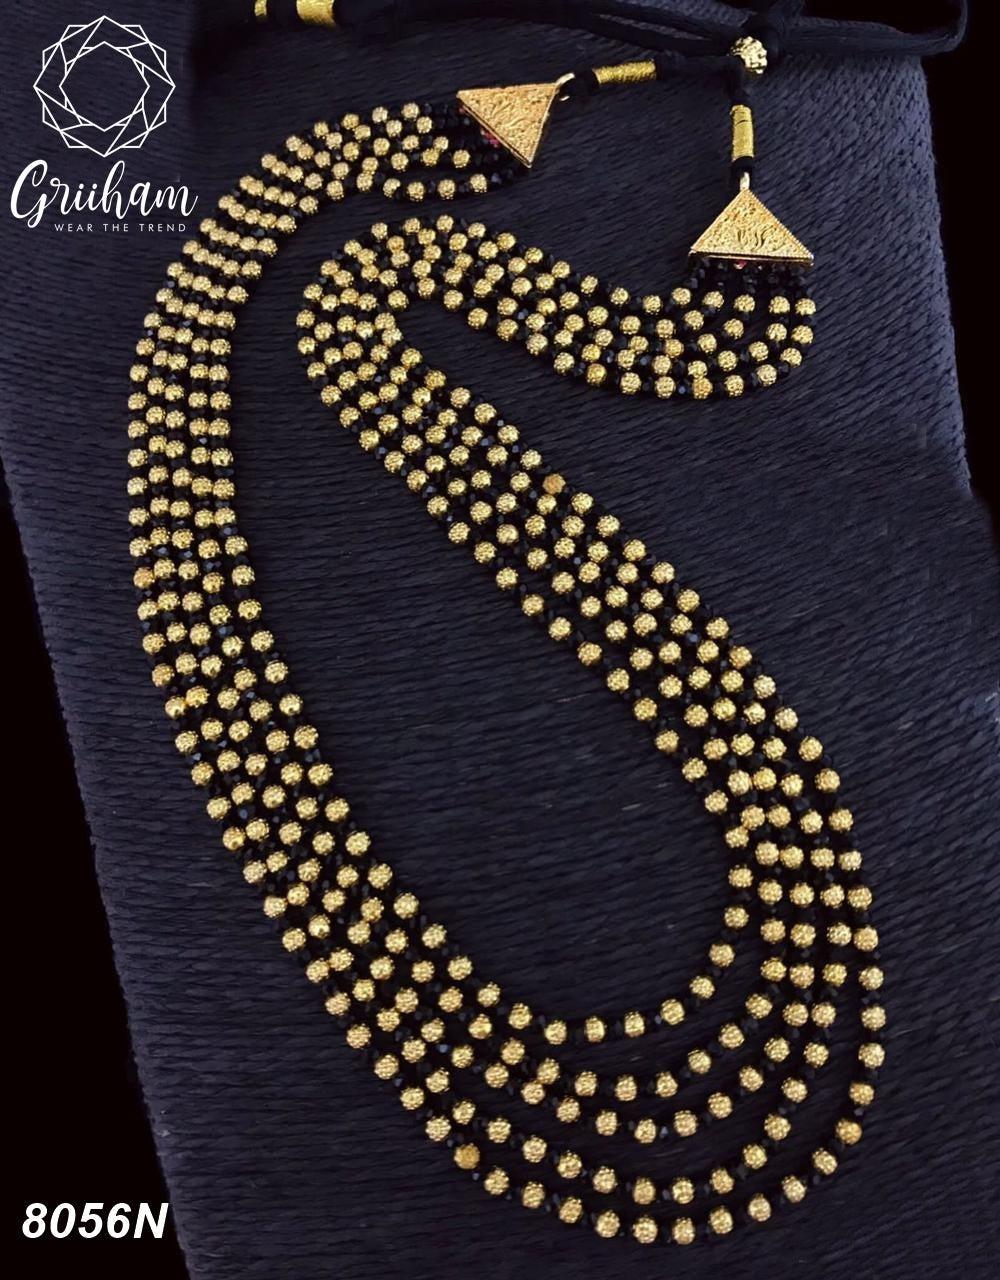 Gold finish 4 layer ball chain Jow mala Black crystals(Length 18 inches extended upto 20 inches)8056N-Necklace Set-Kanakam-Griiham